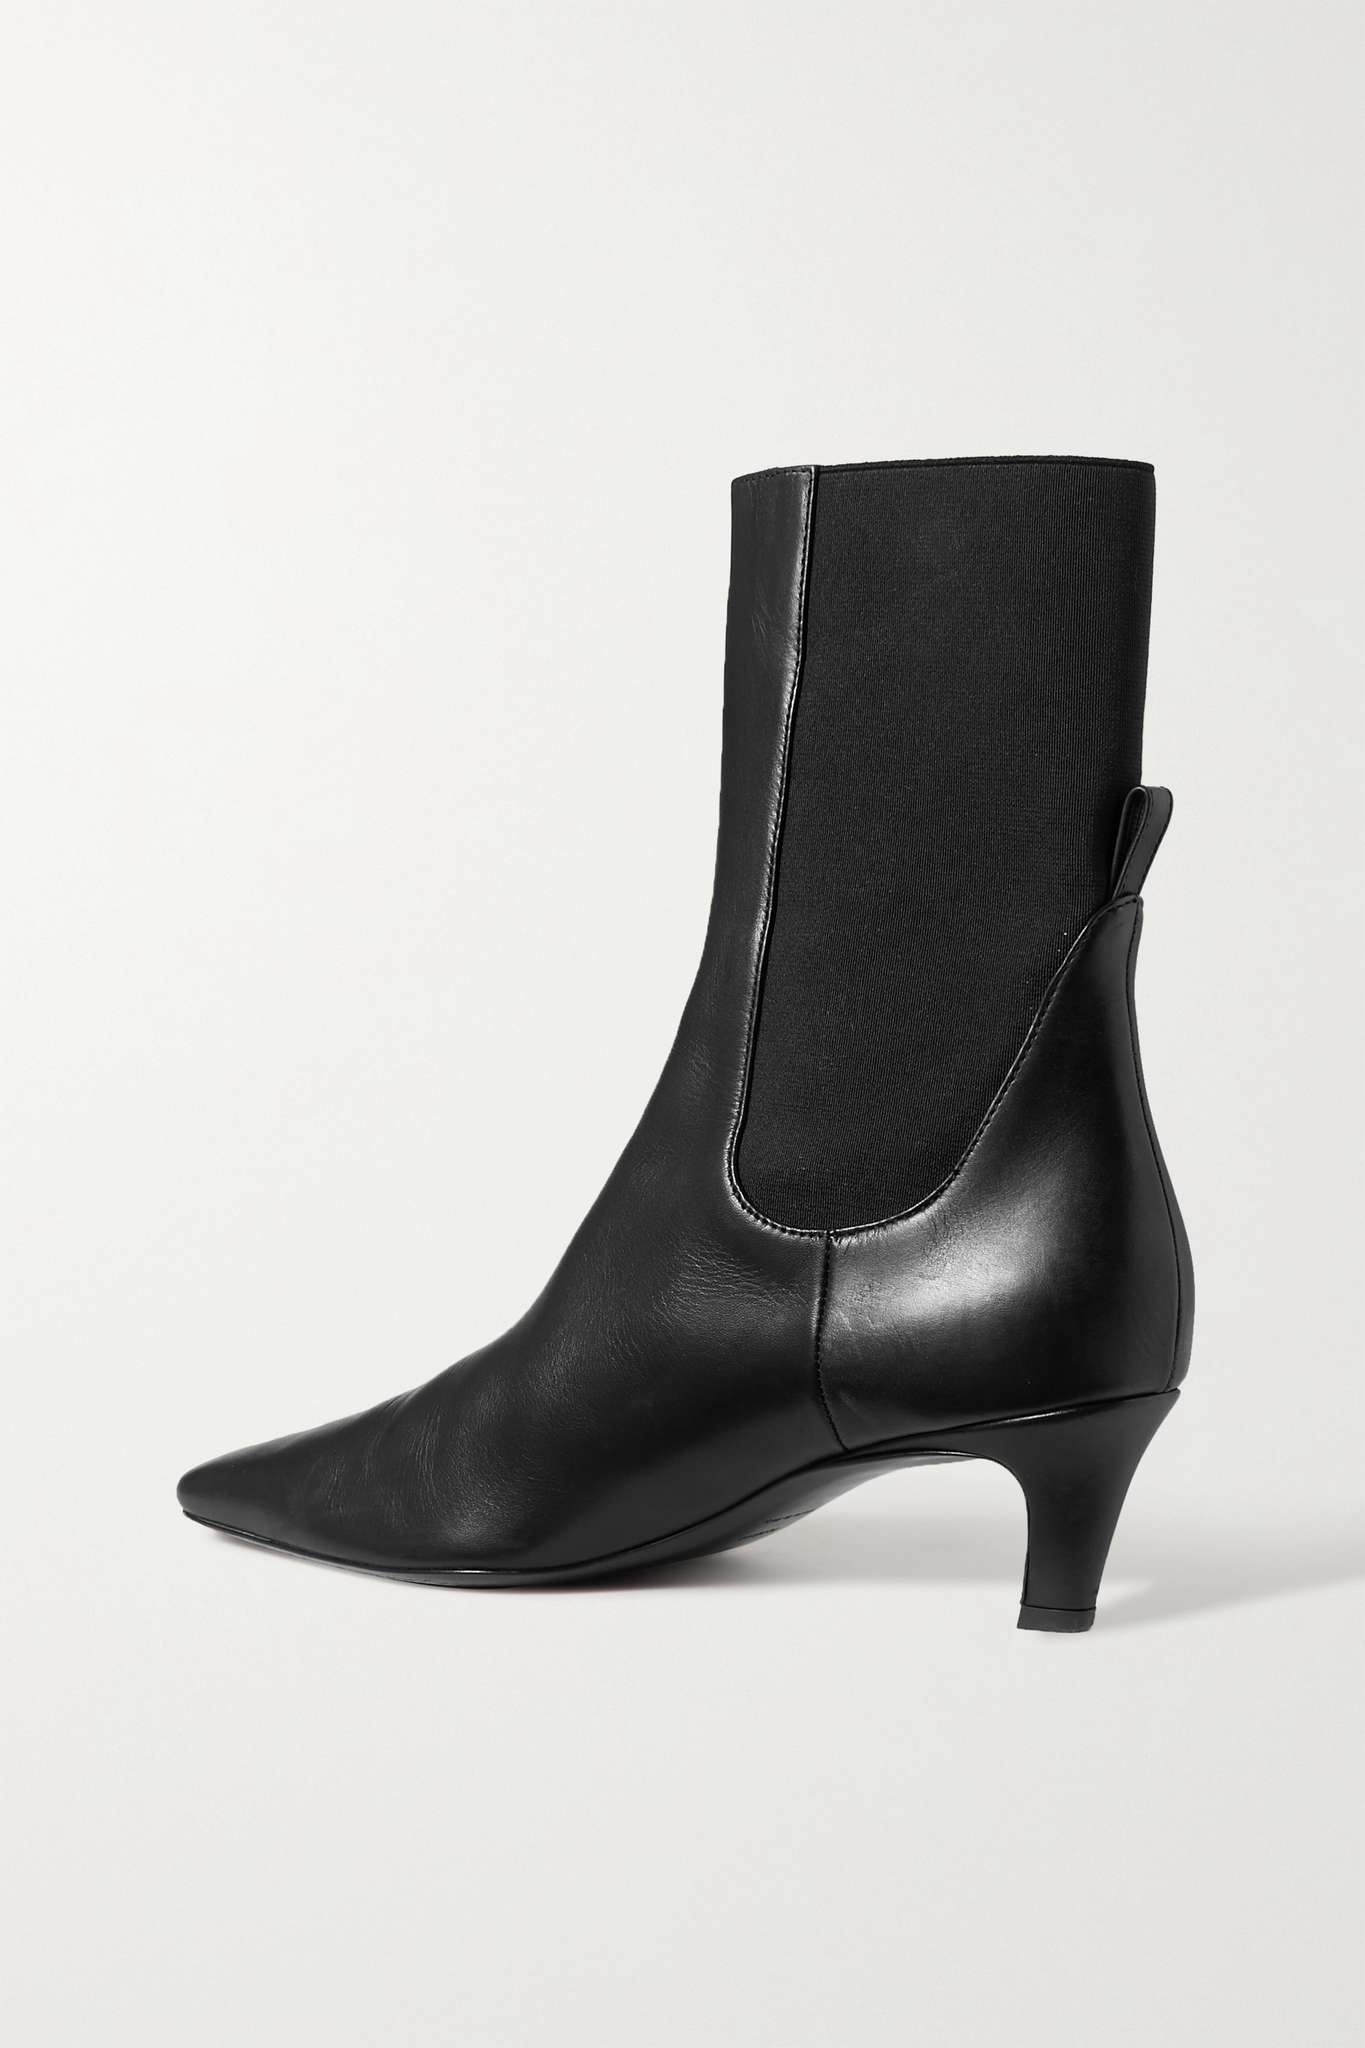 The Mid Heel leather ankle boots - 3